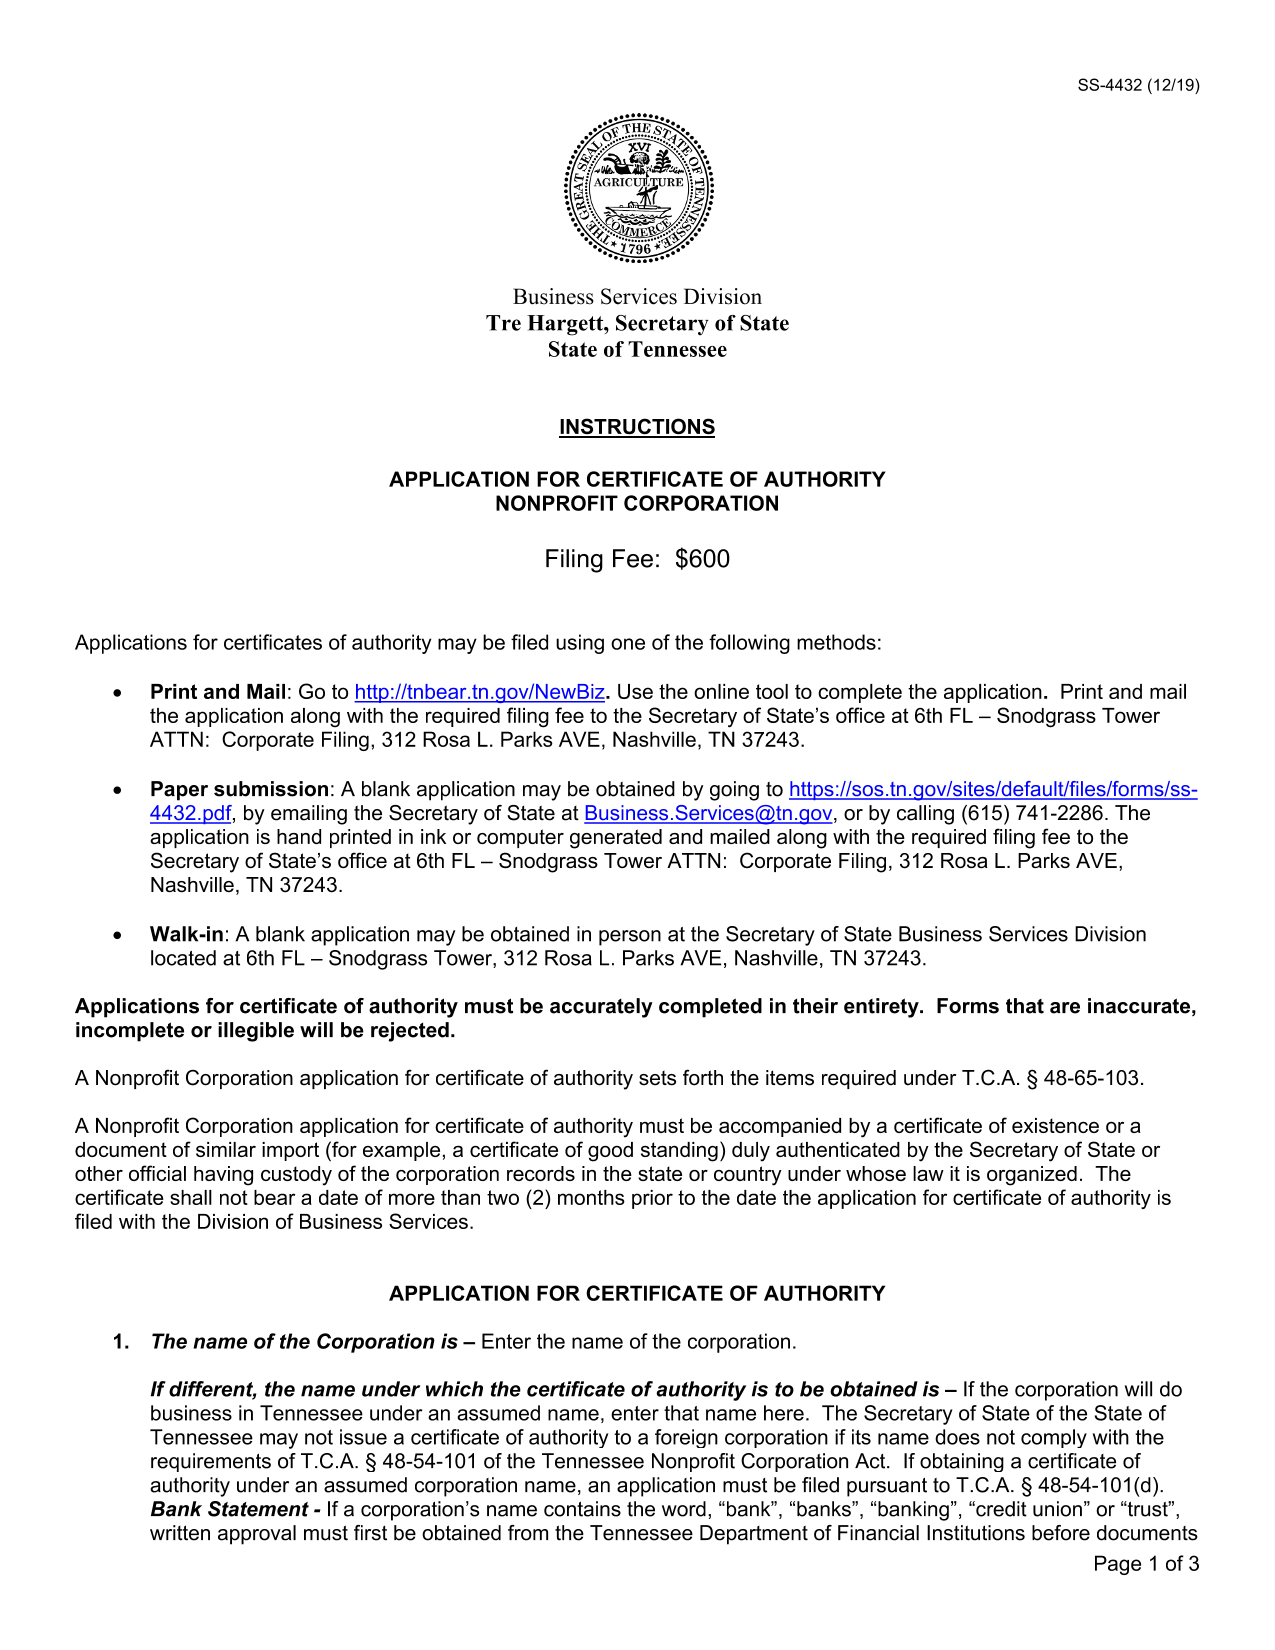 tennessee-application-for-certificate-of-authority-for-a-nonprofit-organization